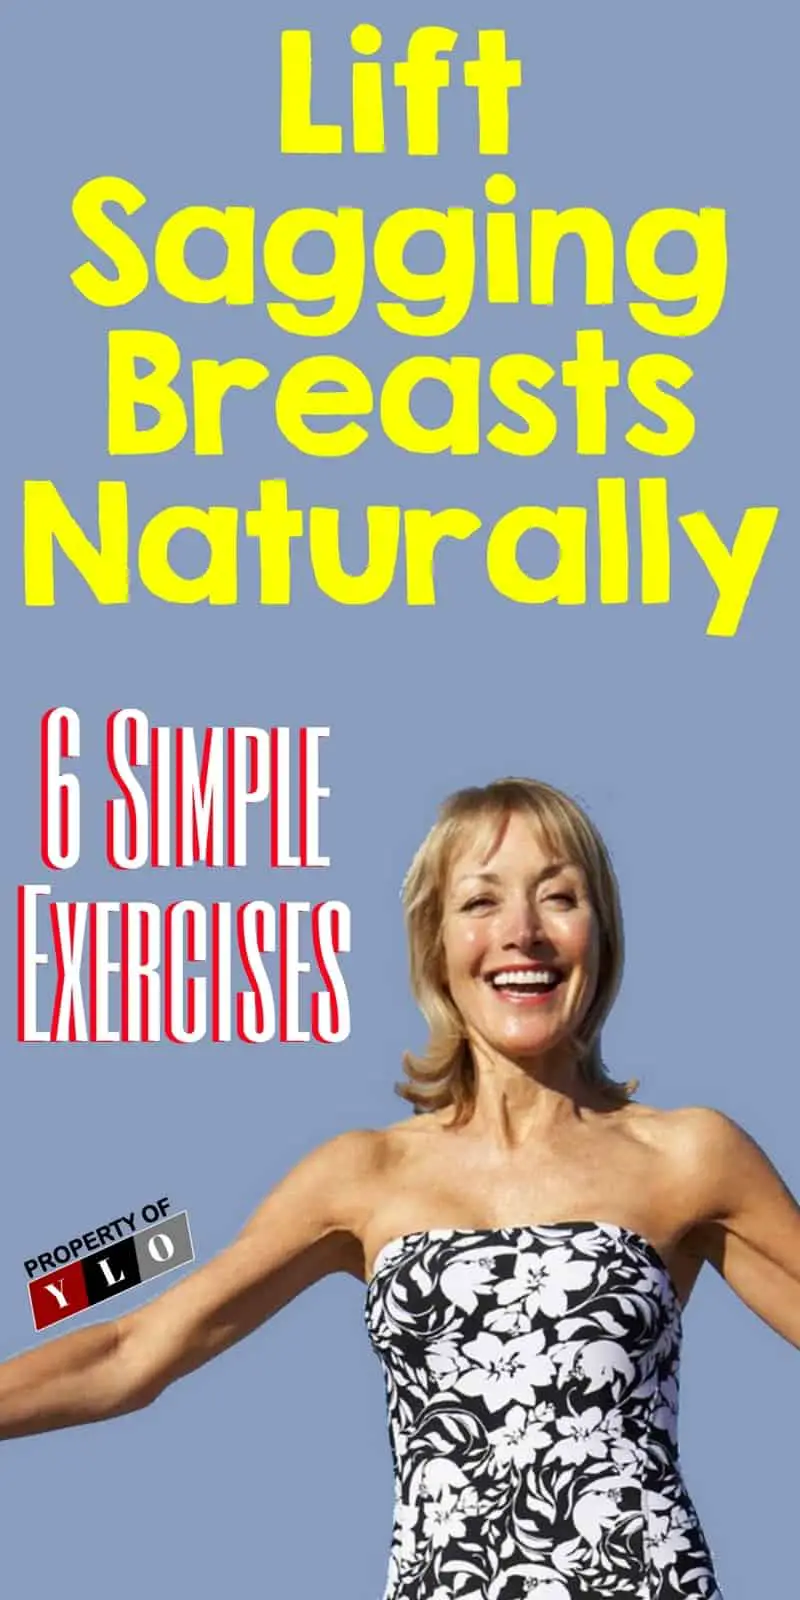 Lift Sagging Breasts Naturally 6 Simple Exercises Your Lifestyle Options